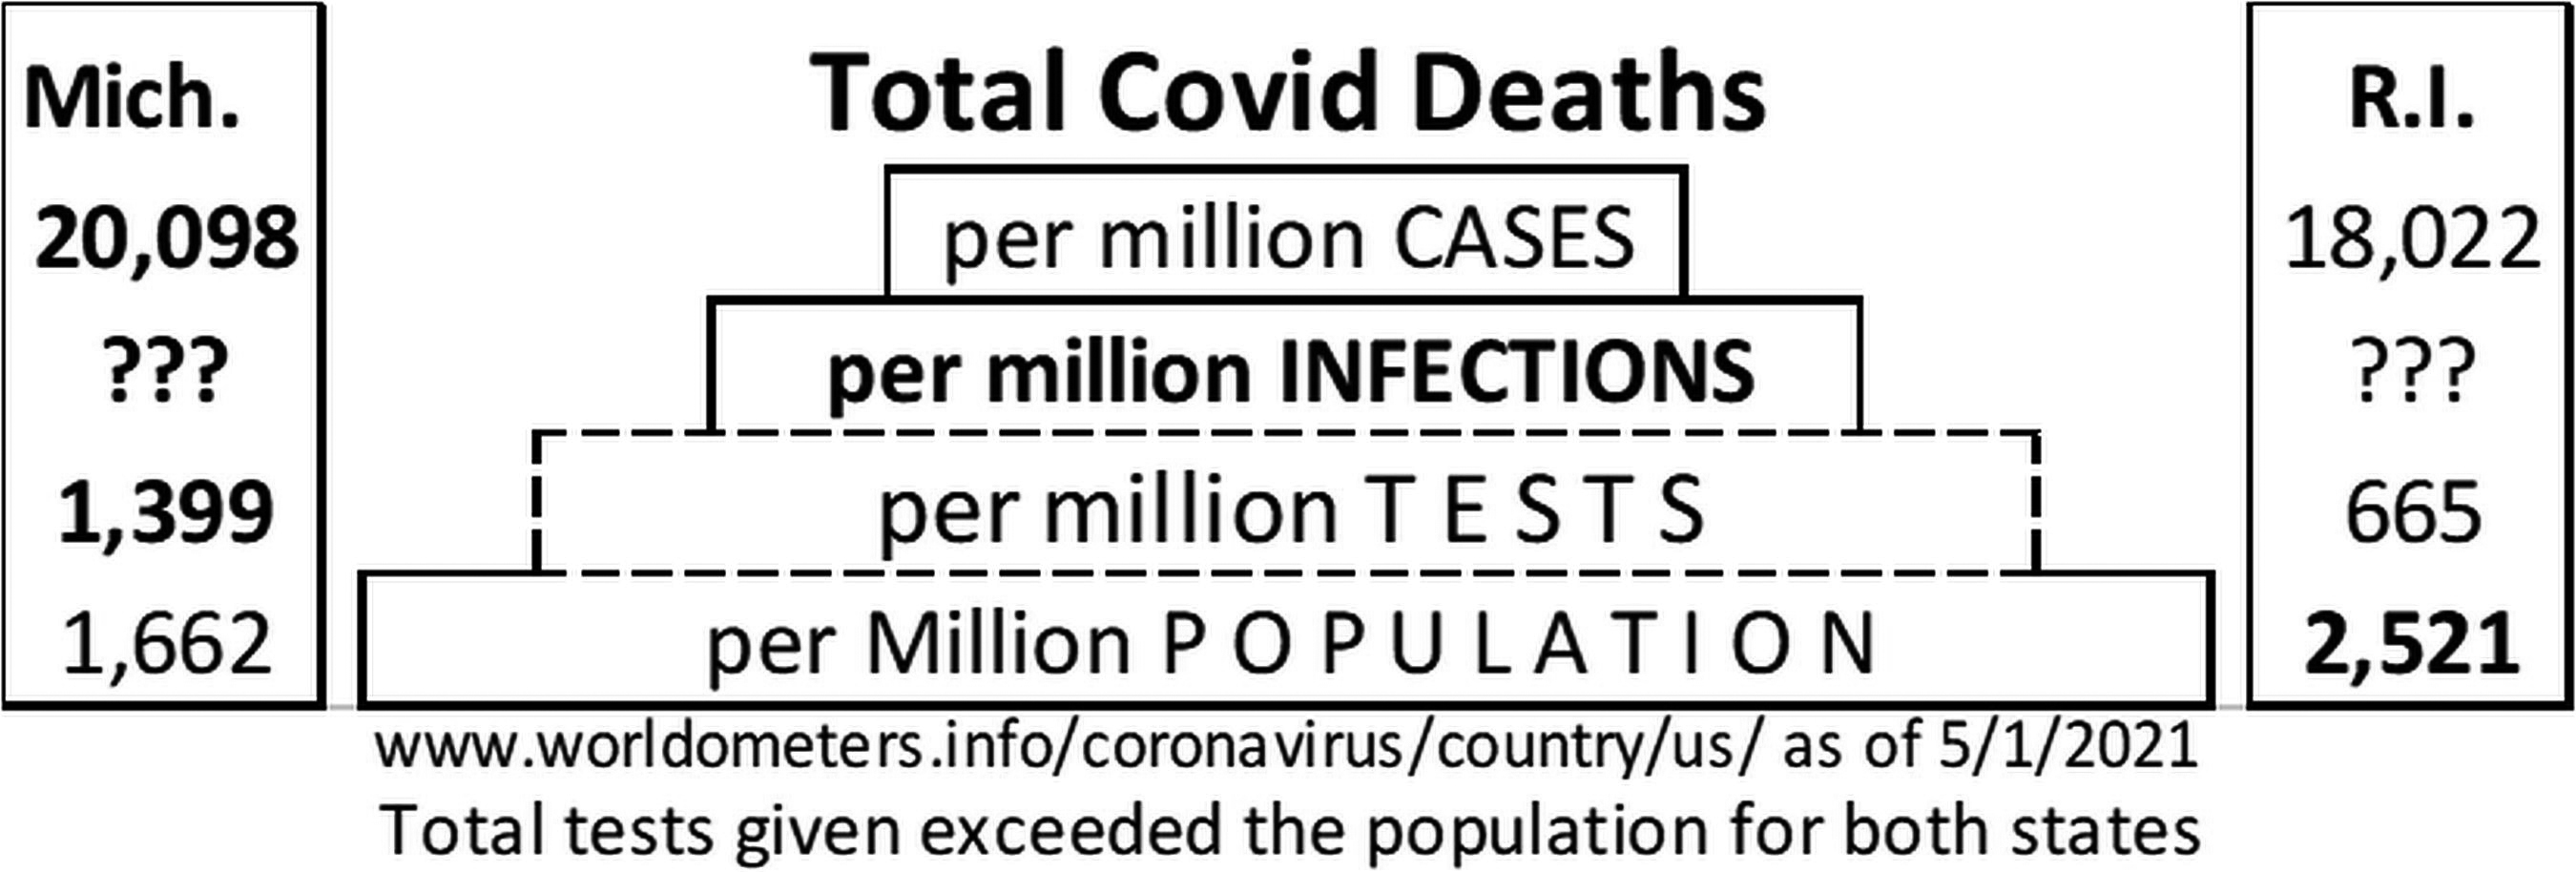 COVID-19 death rates for two US states.